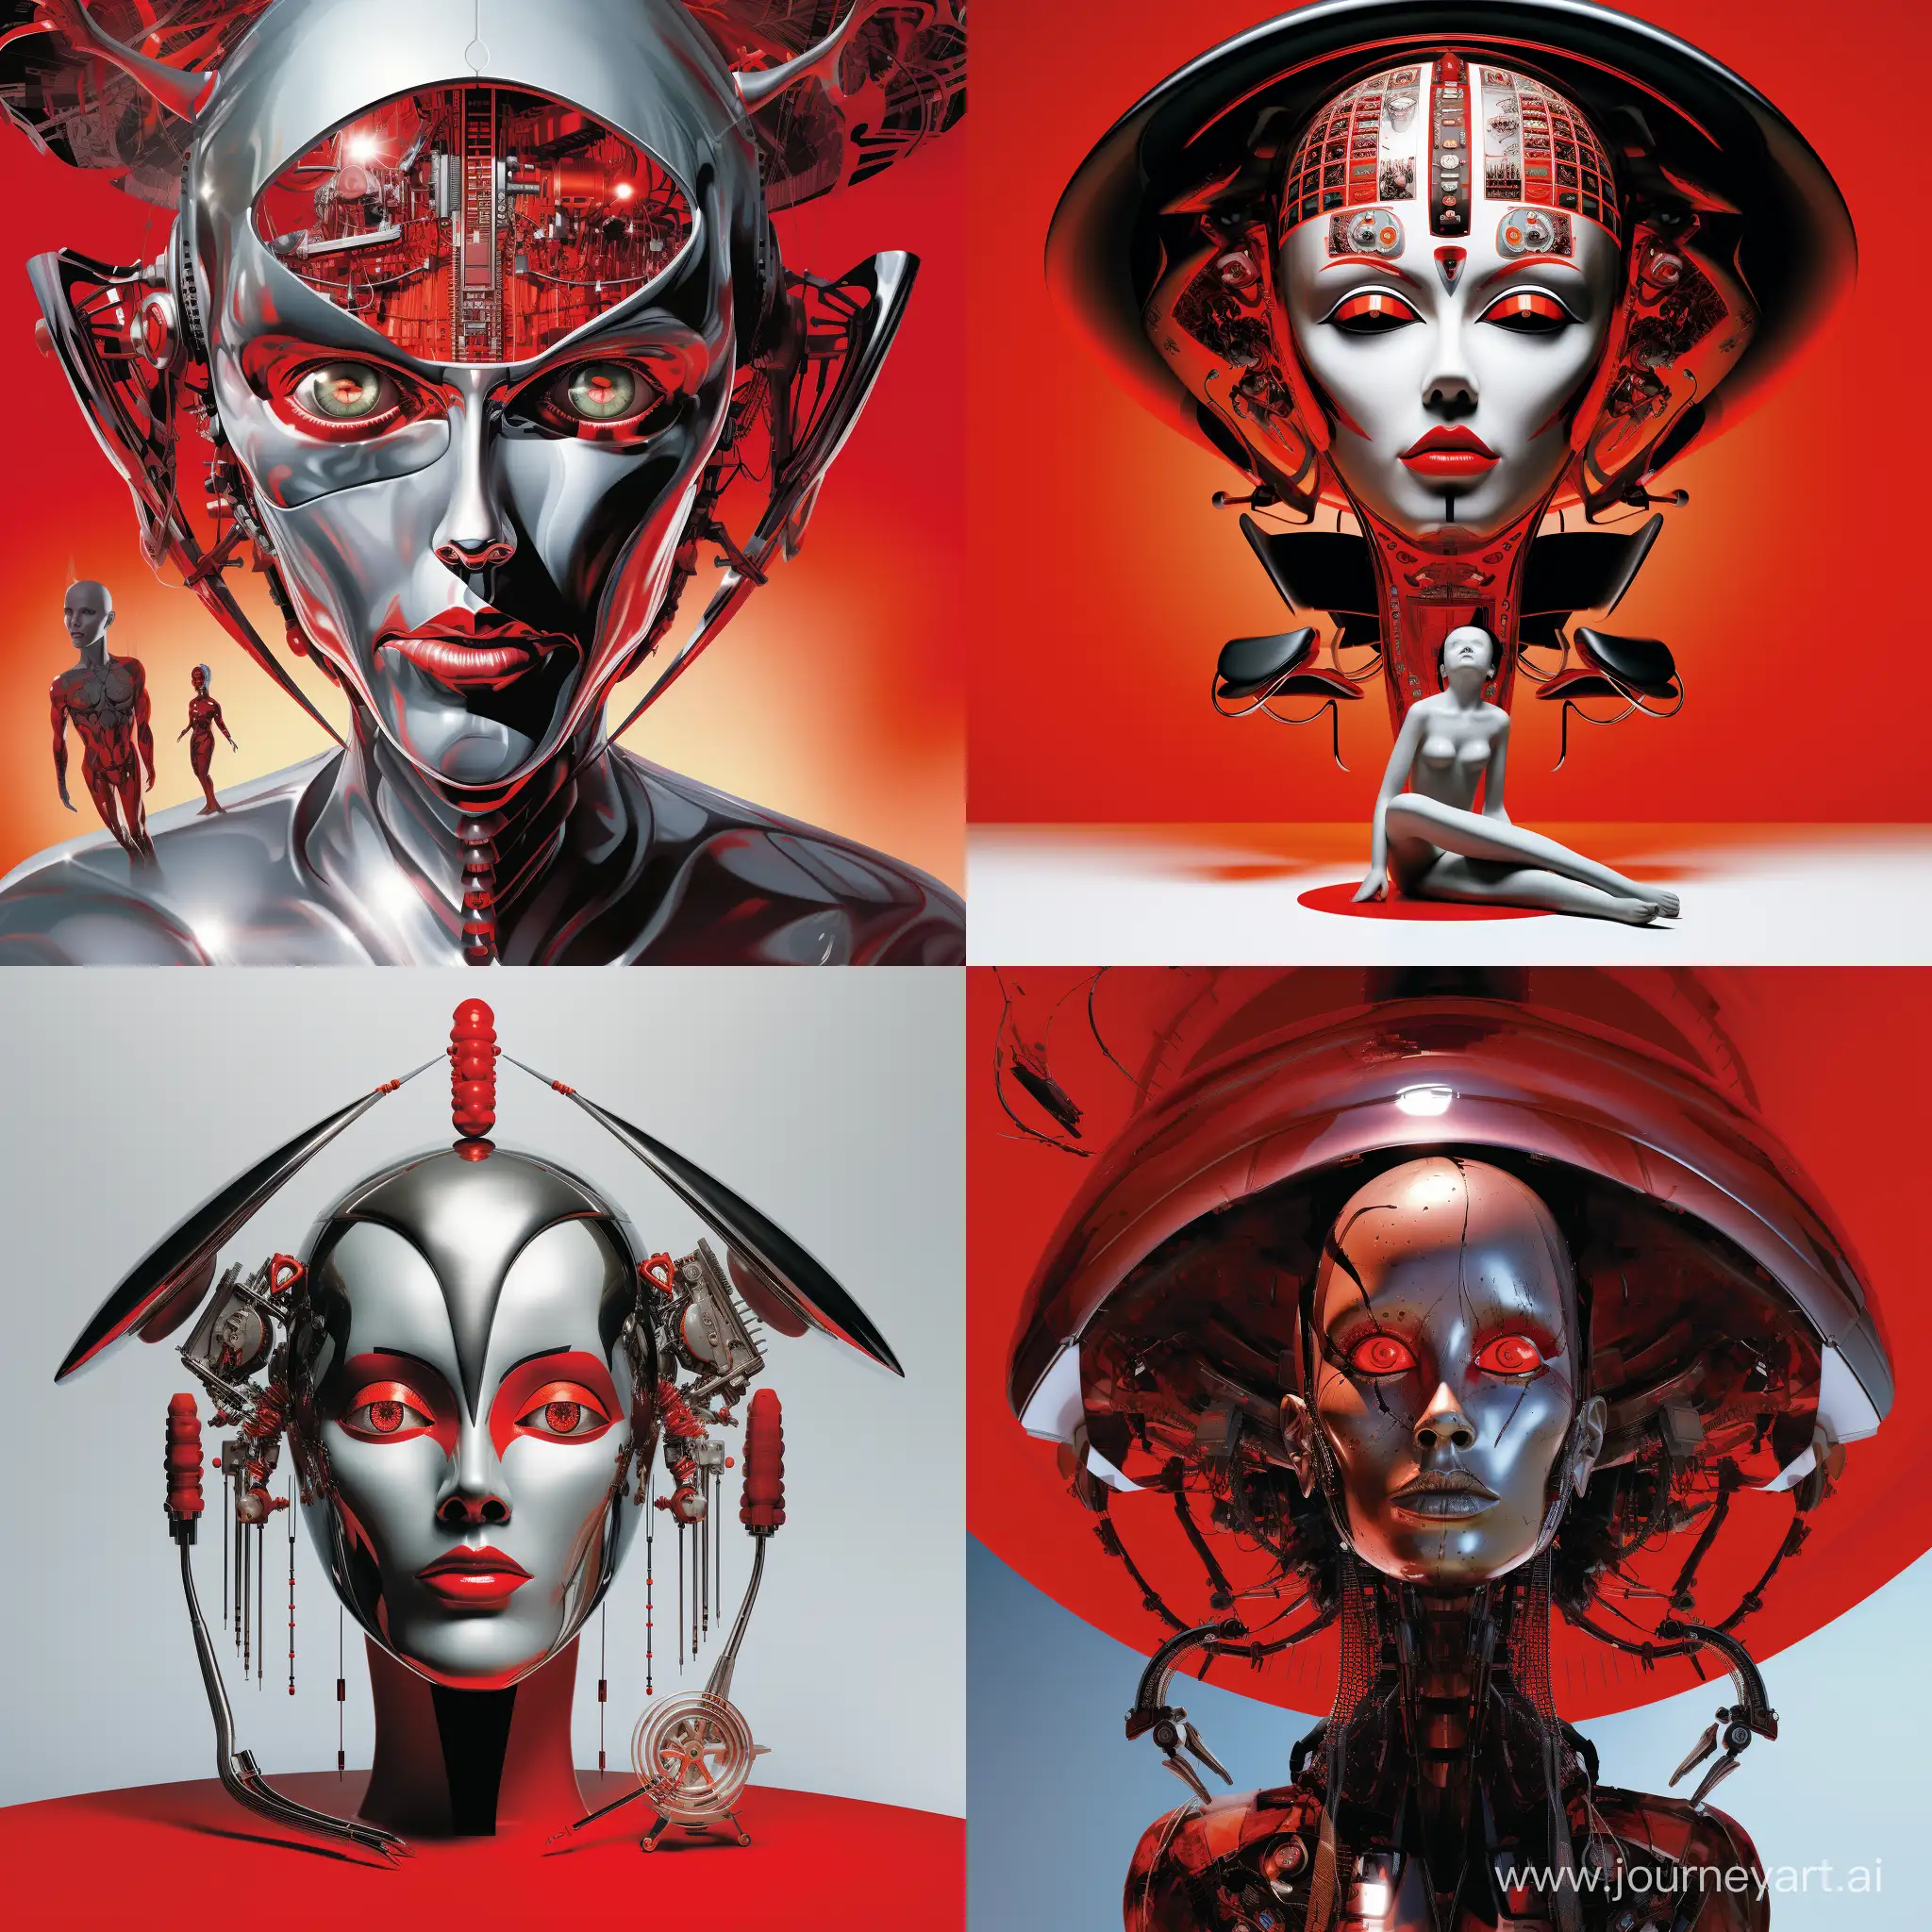 Futuristic-Metallic-Head-with-Red-Eyes-and-Enigmatic-Surroundings